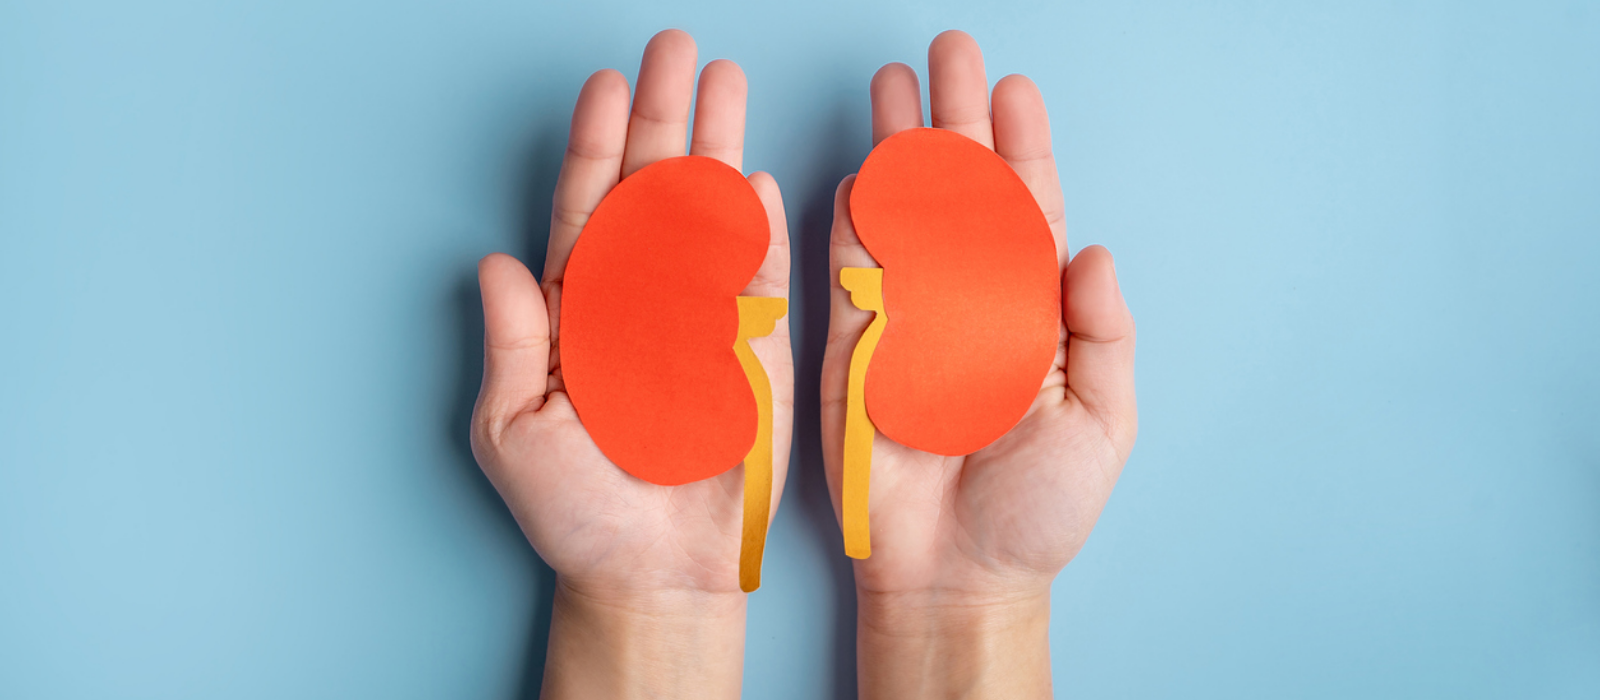 Two hands hold a graphical representation of kidneys.